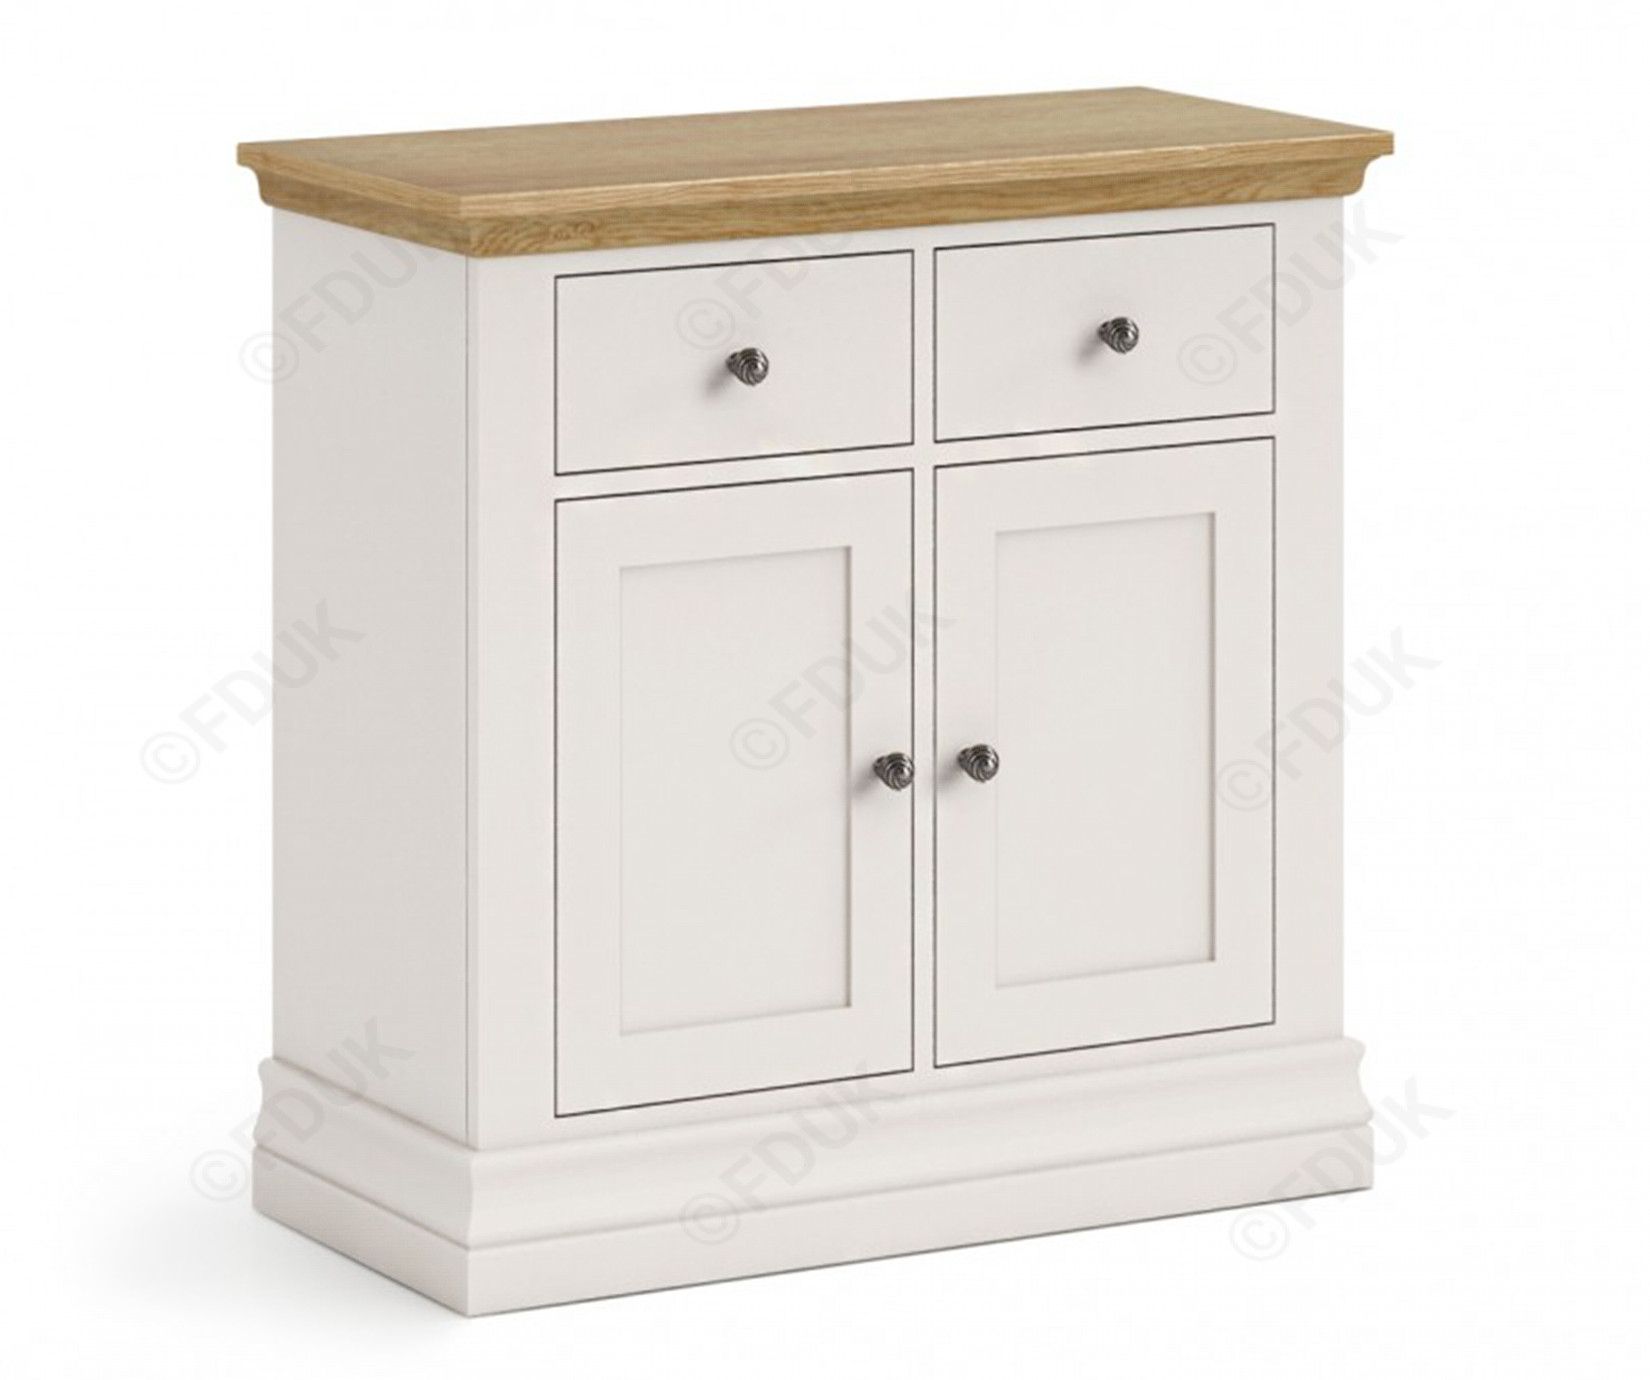 Corndell Annecy Mini Sideboard Fduk Best Price Guarantee We Will Beat Our  Competitors Price! Give Our Sales Team A Call On 0116 235 77 86 And We Will Within 2018 Annecy Sideboards (Photo 6 of 20)